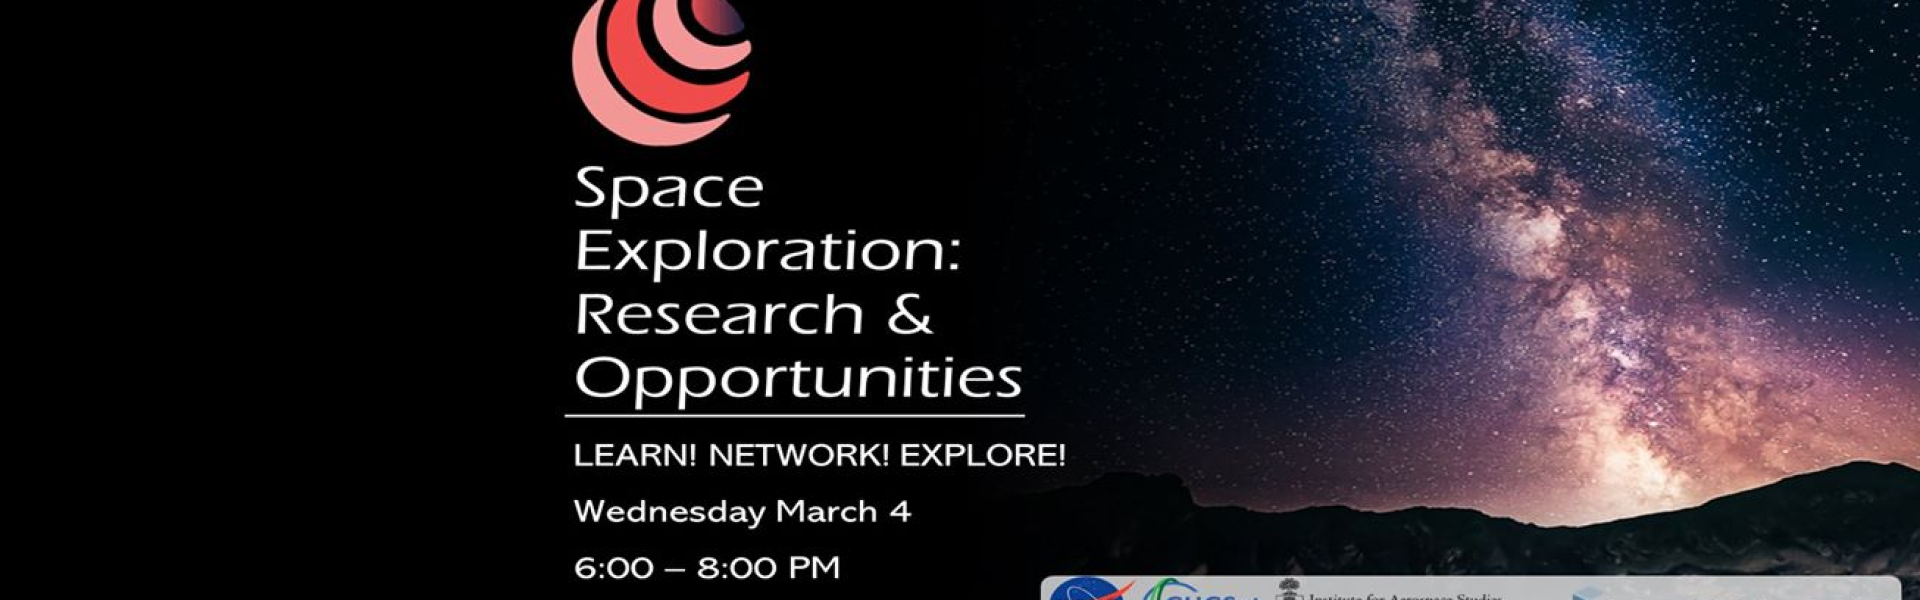 Space Exploration: Research & Opportunities